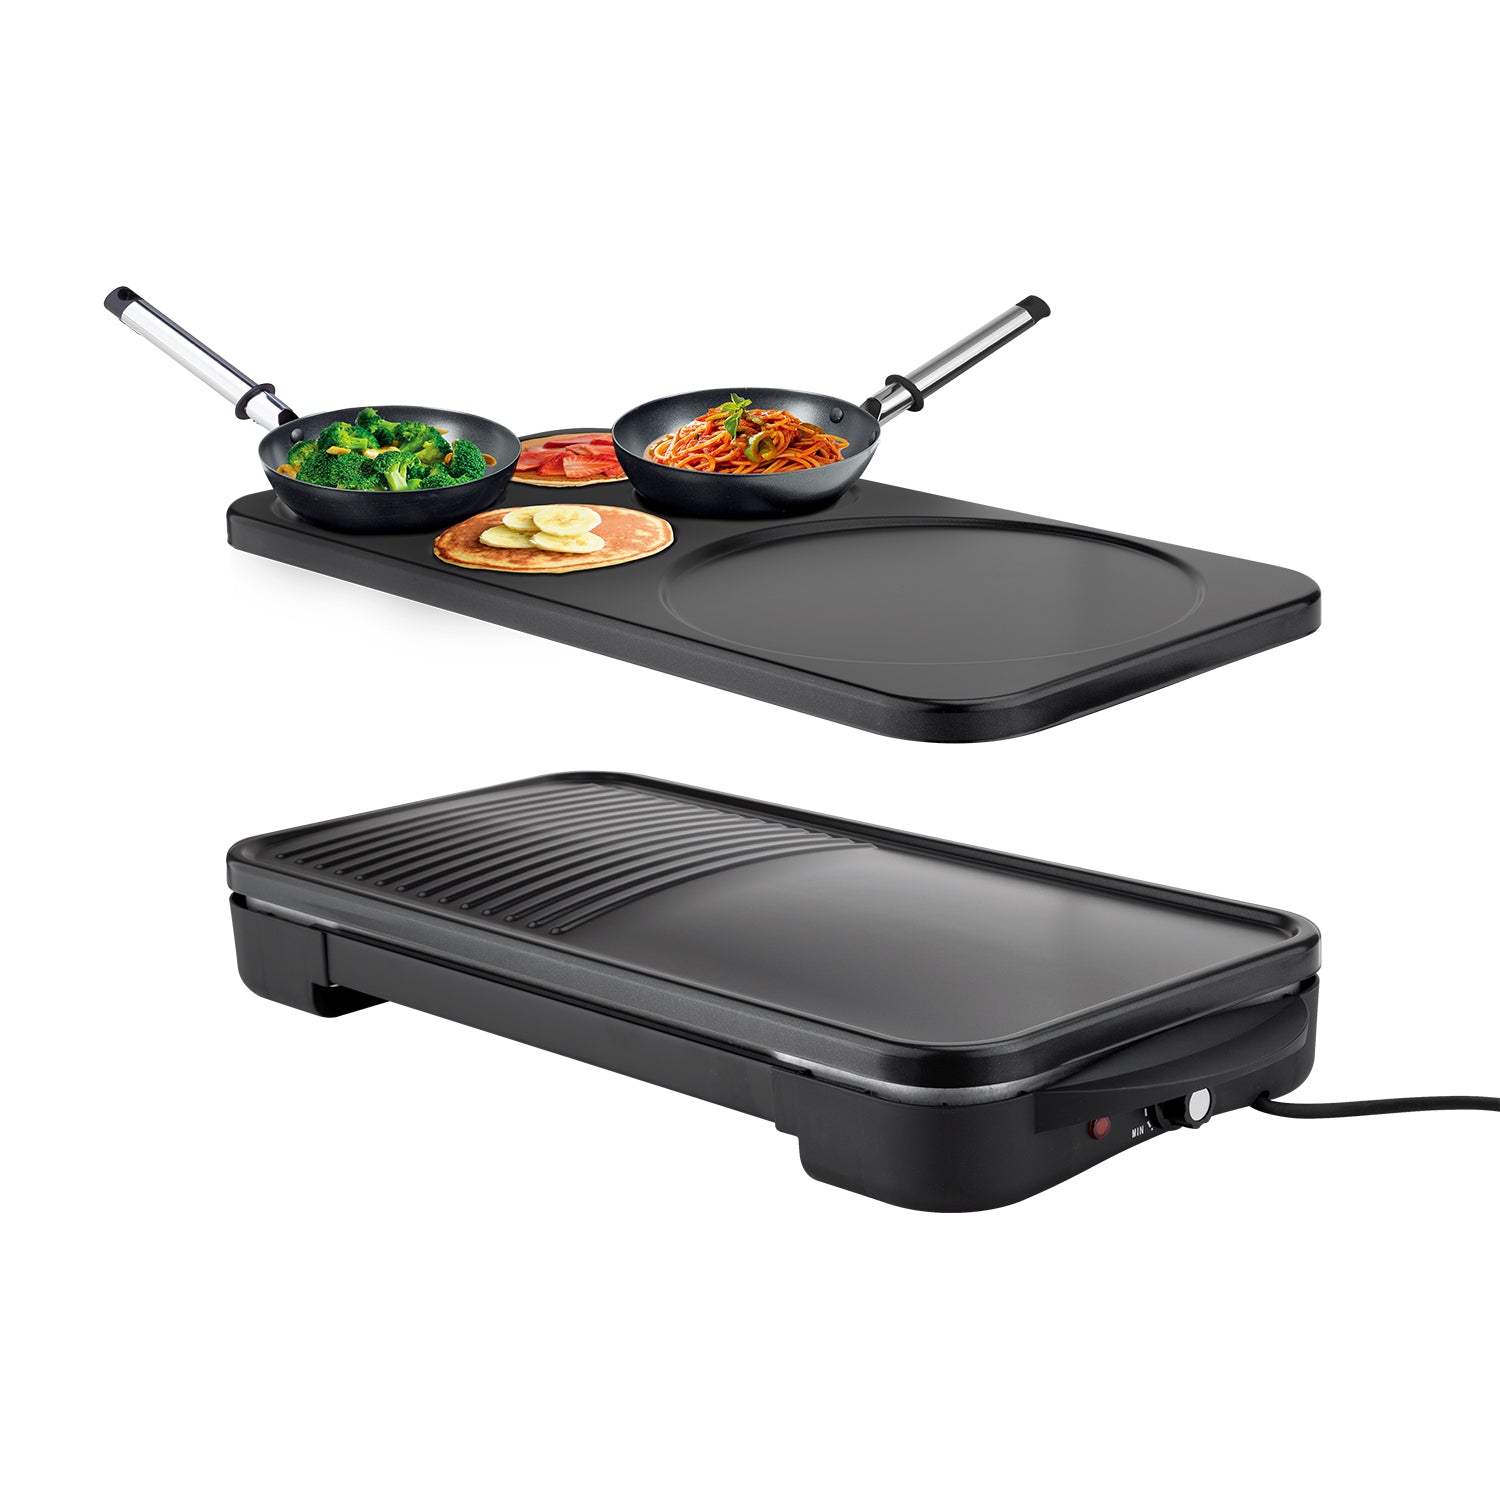 Electric griddle